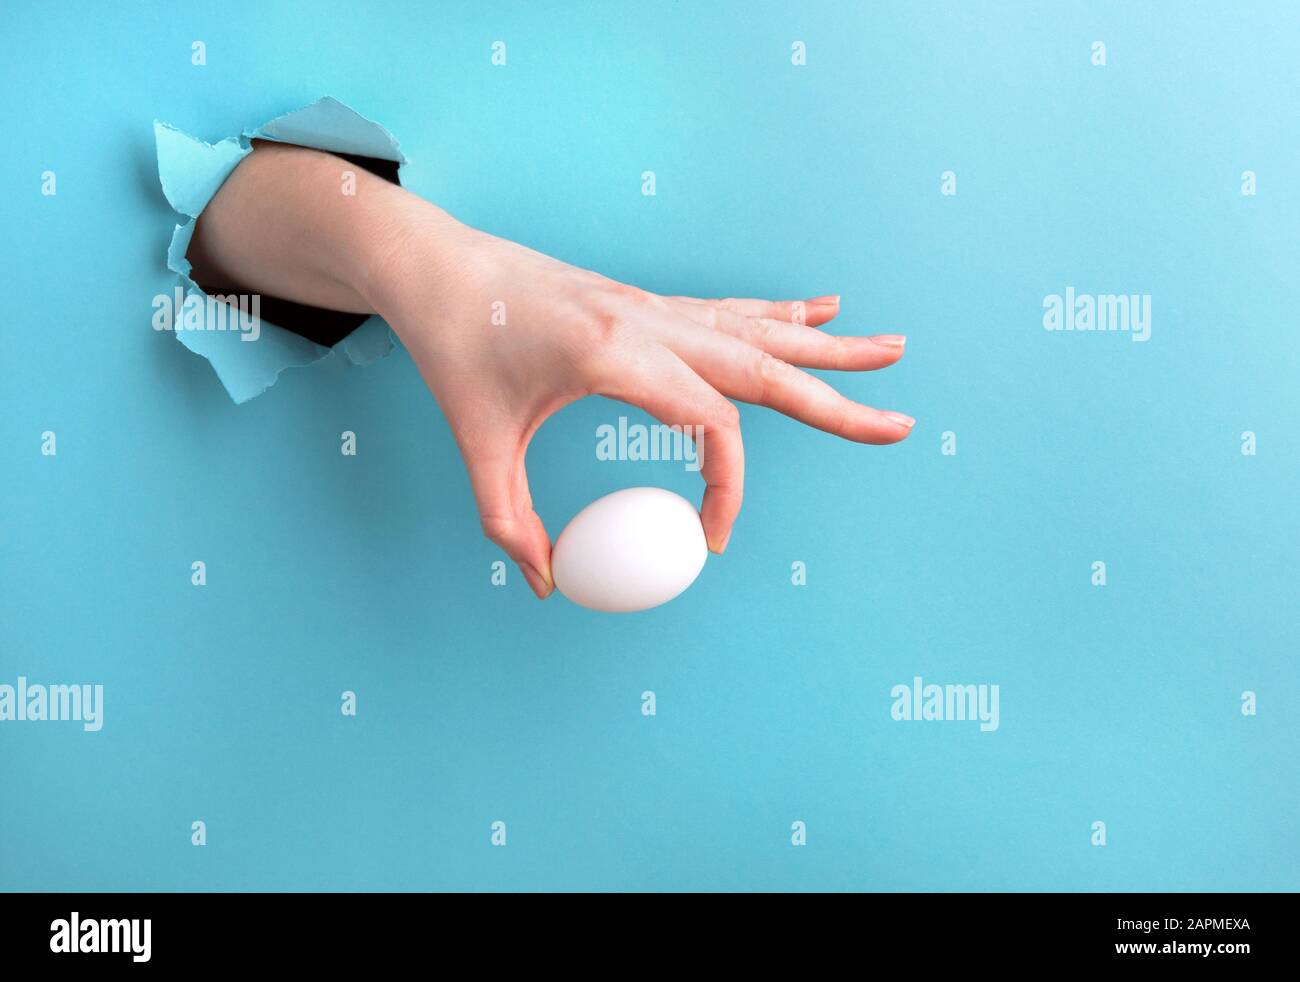 White egg in a woman's hand against a blue background with a hole. Minimalist photo with a place for text Stock Photo